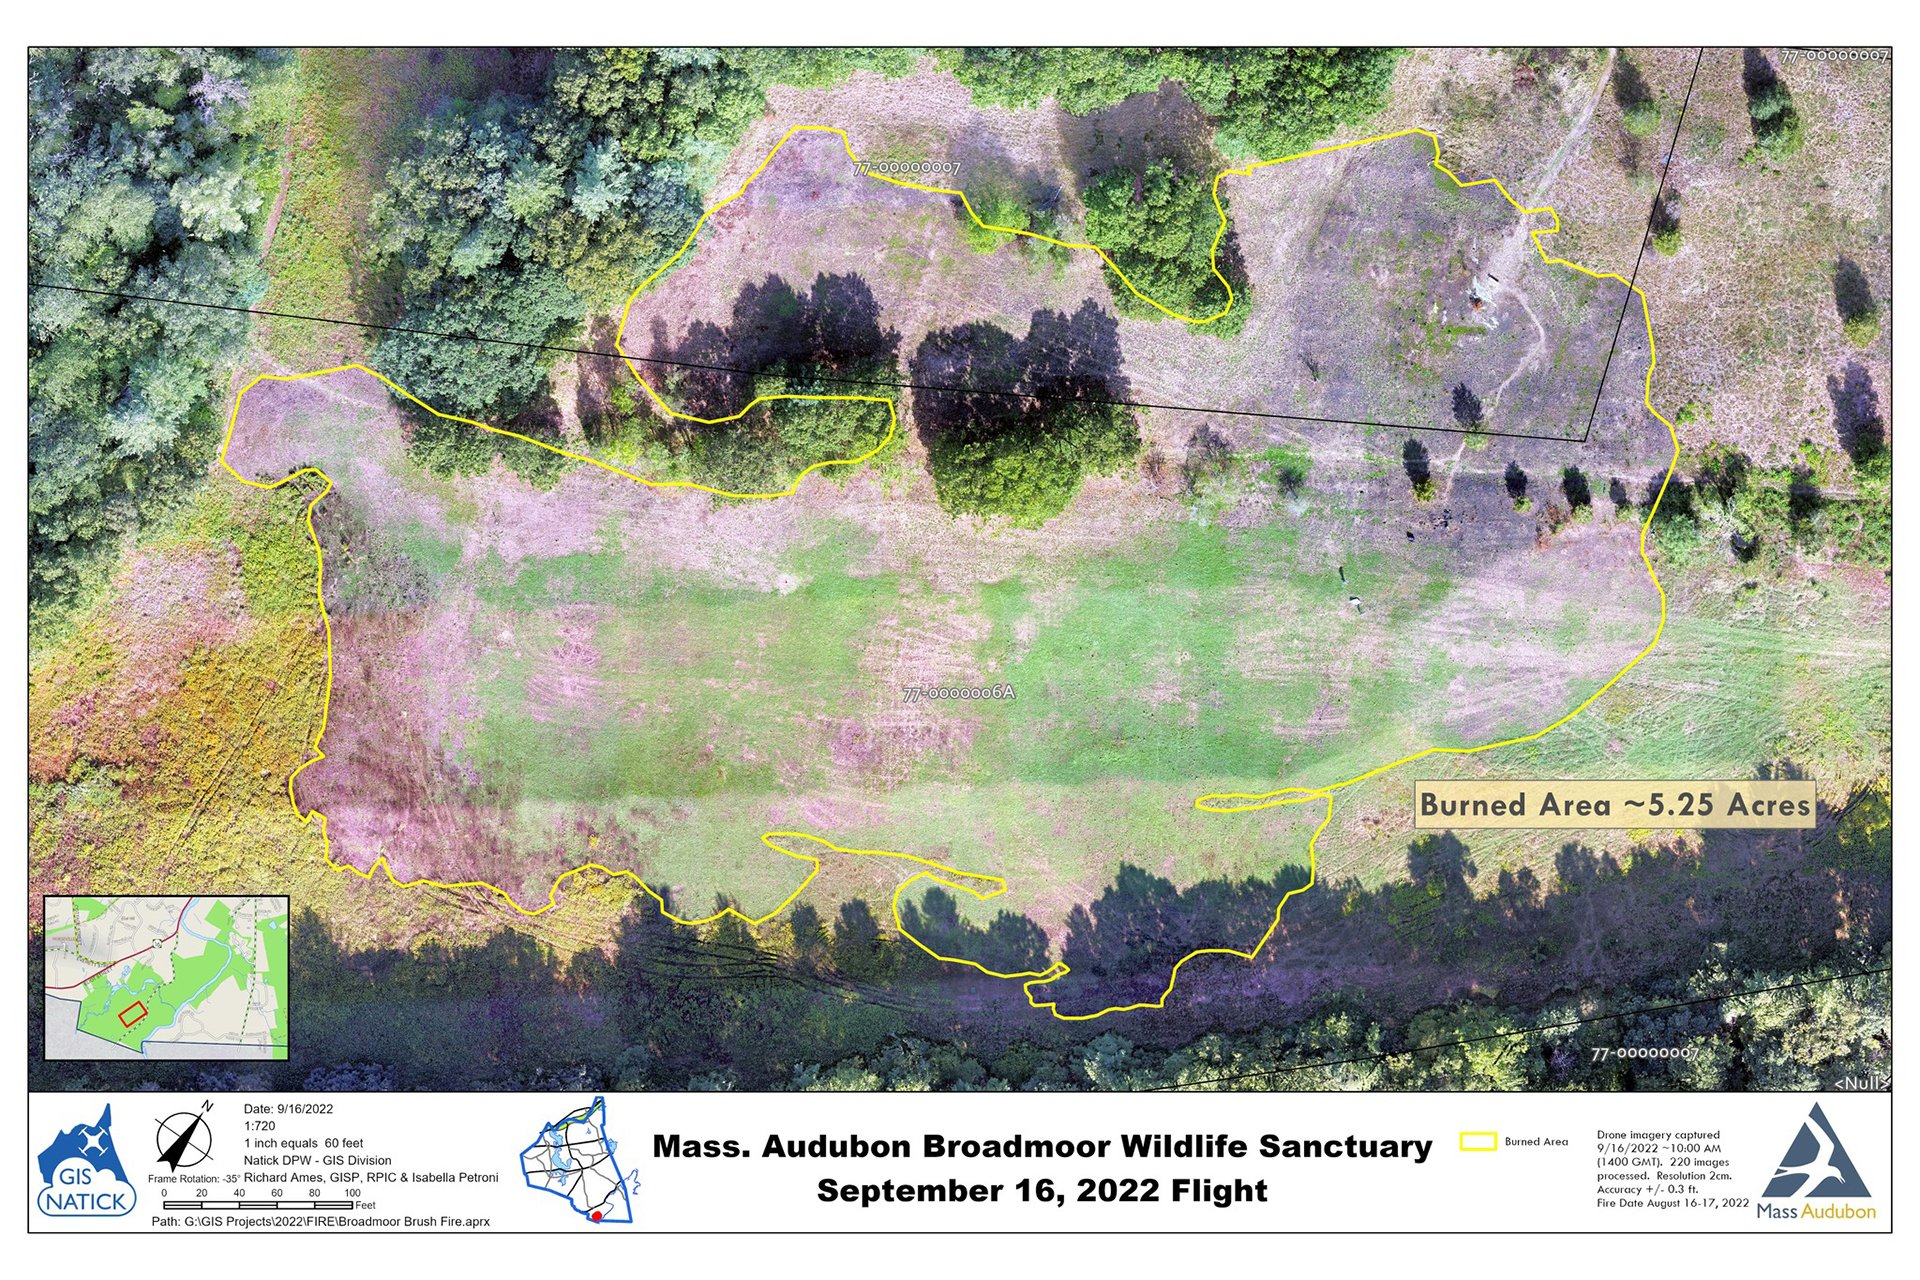 Aerial view of Broadmoor showing brush fire recovery as of September 16, 2022